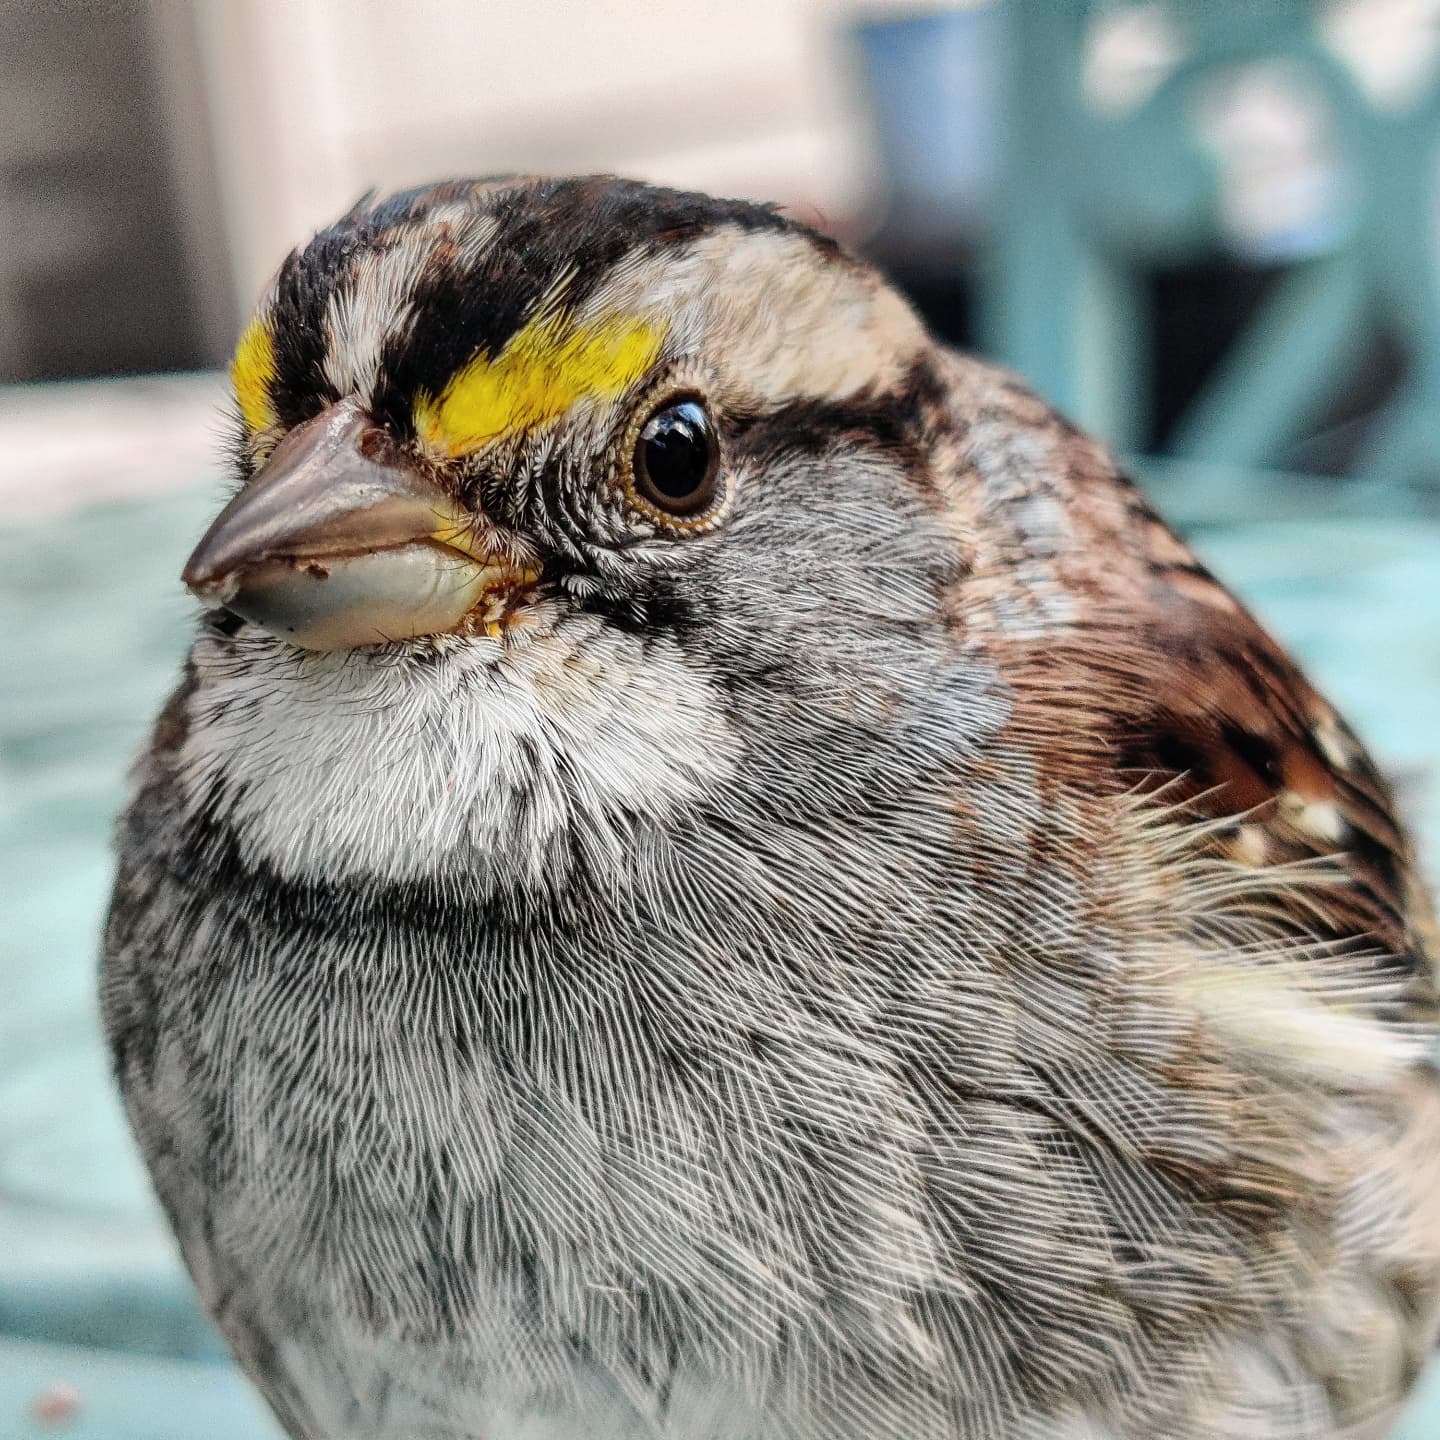 I revived this bird following a collision with my deck door...#sparrow #savannahsparrow #concussion